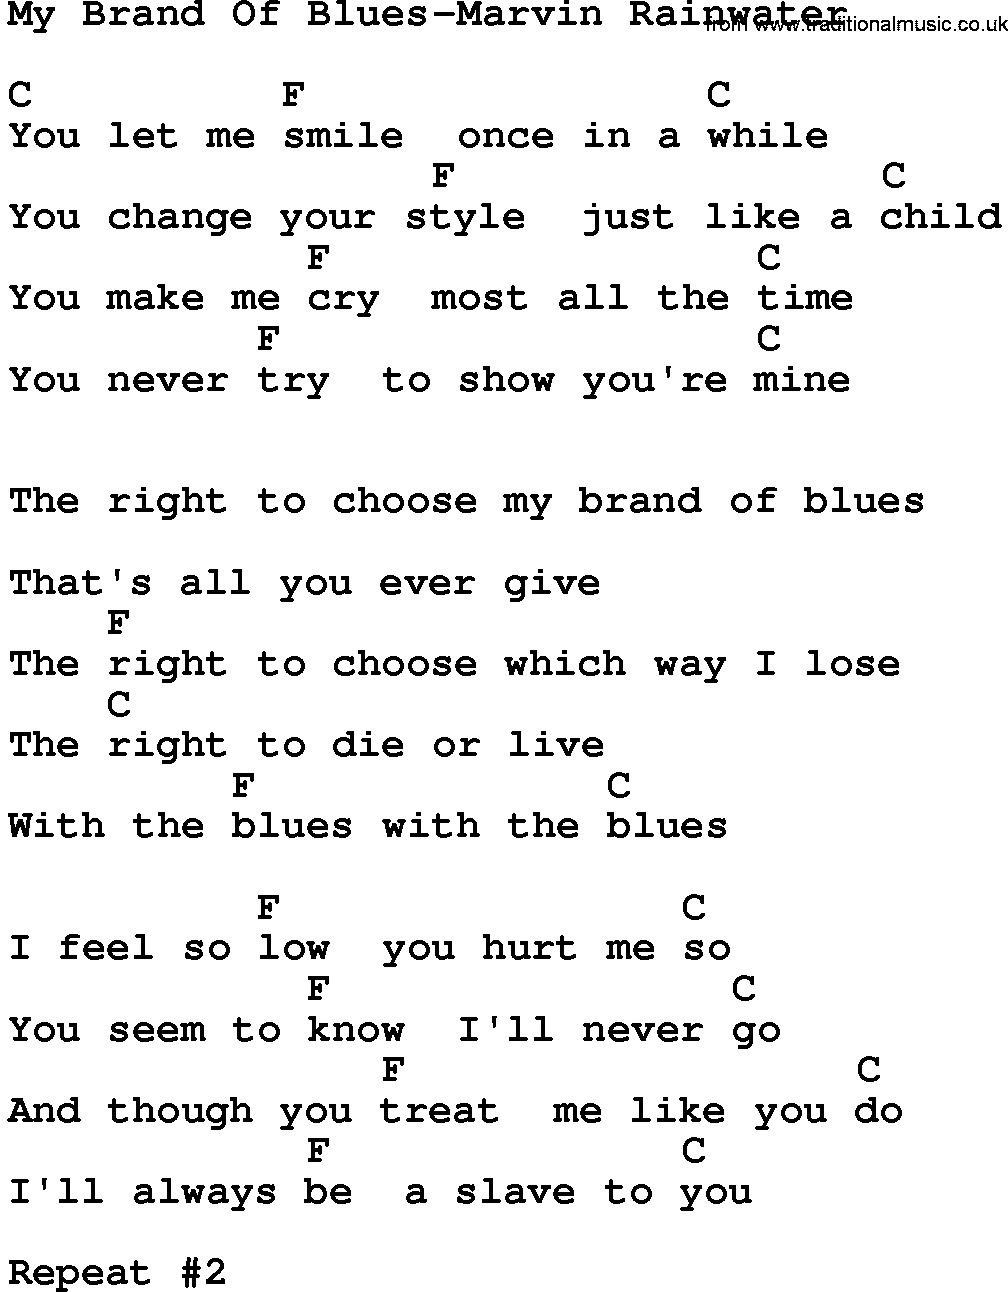 Country music song: My Brand Of Blues-Marvin Rainwater lyrics and chords